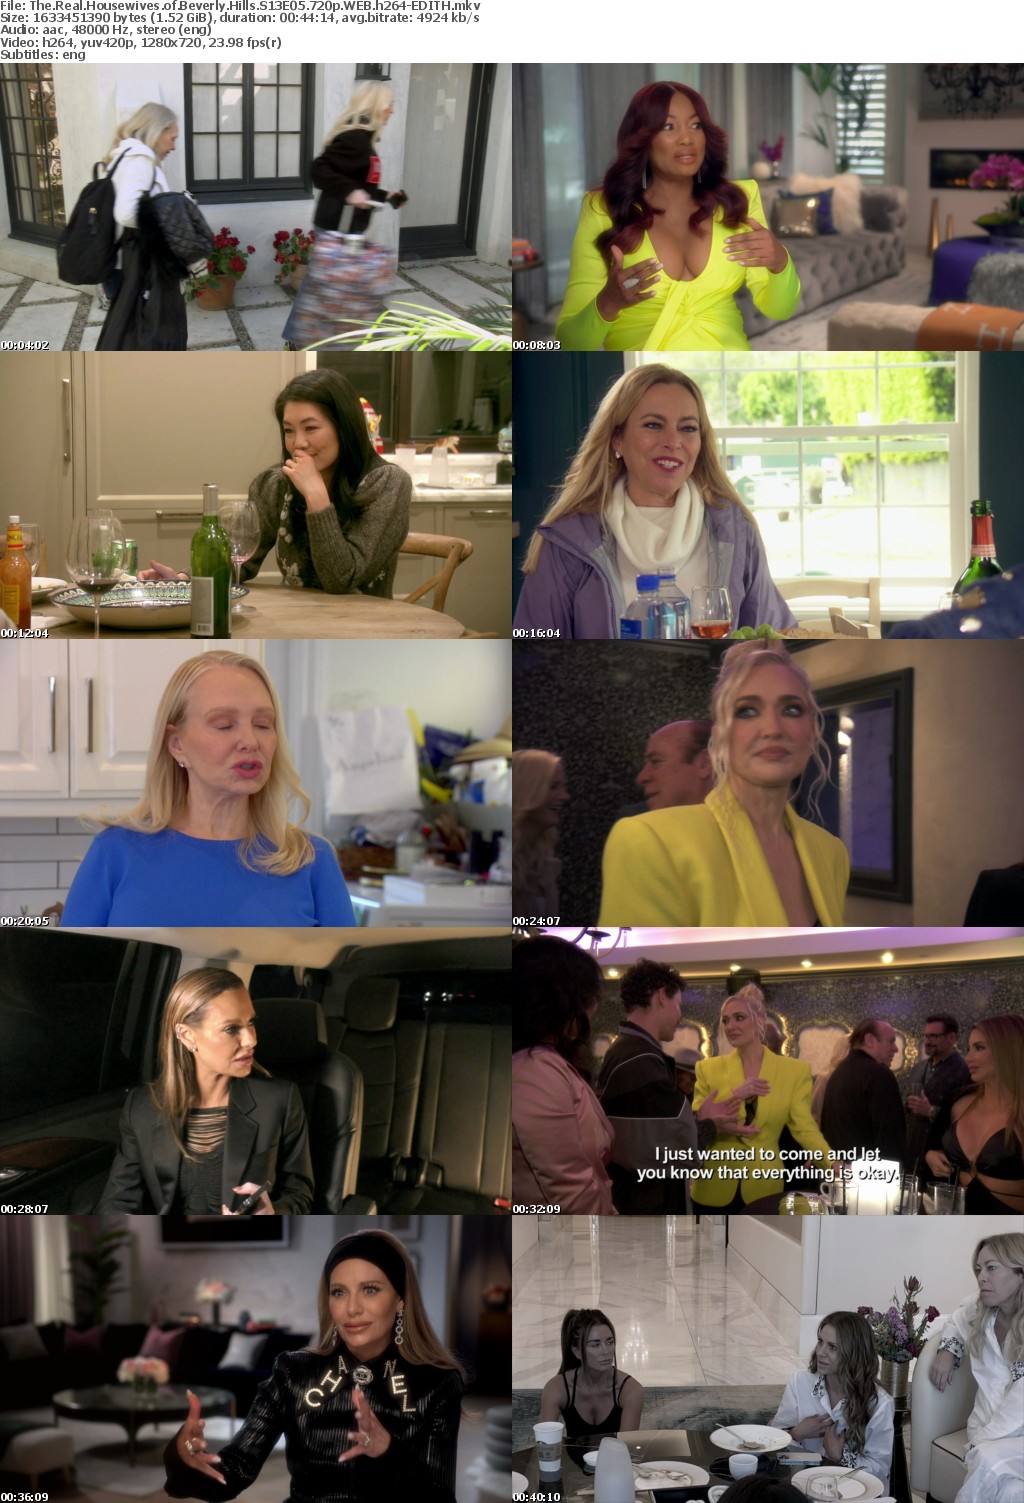 The Real Housewives of Beverly Hills S13E05 720p WEB h264-EDITH